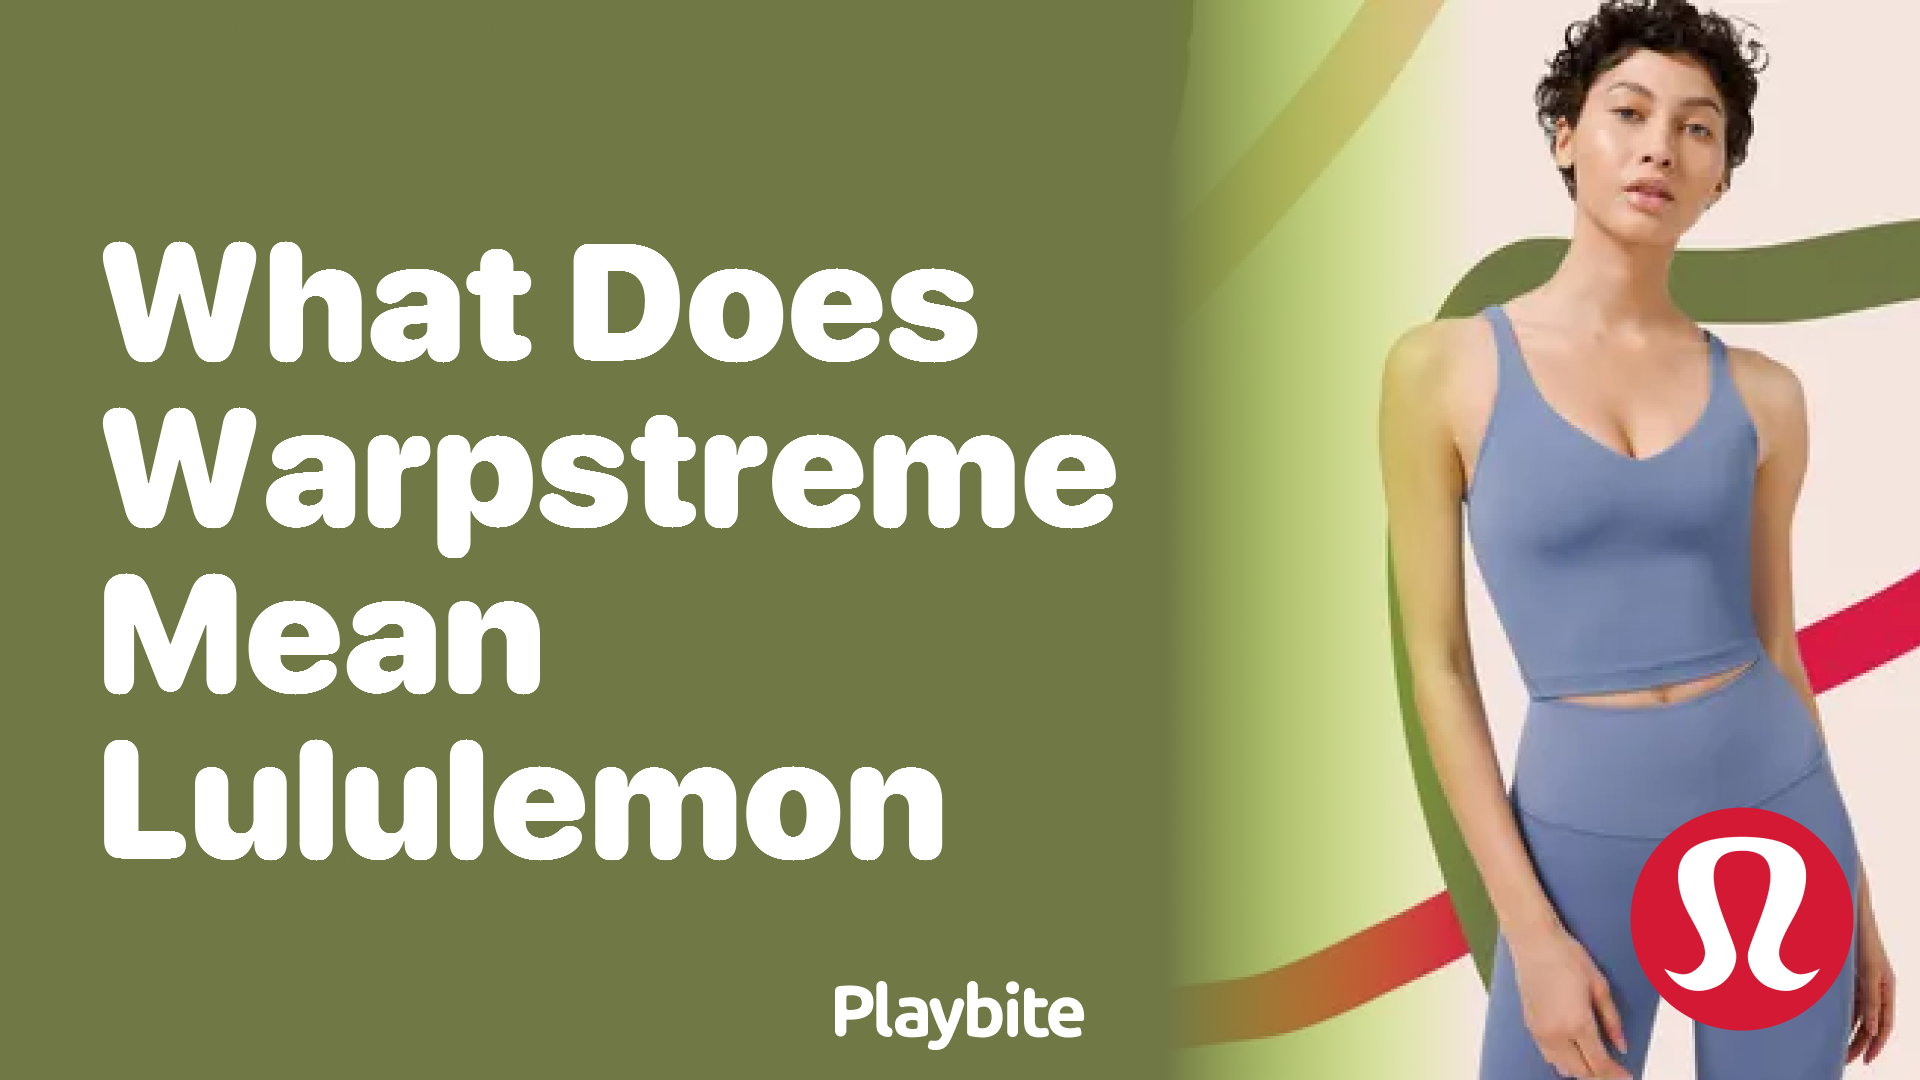 What Does Warpstreme Mean at Lululemon? - Playbite